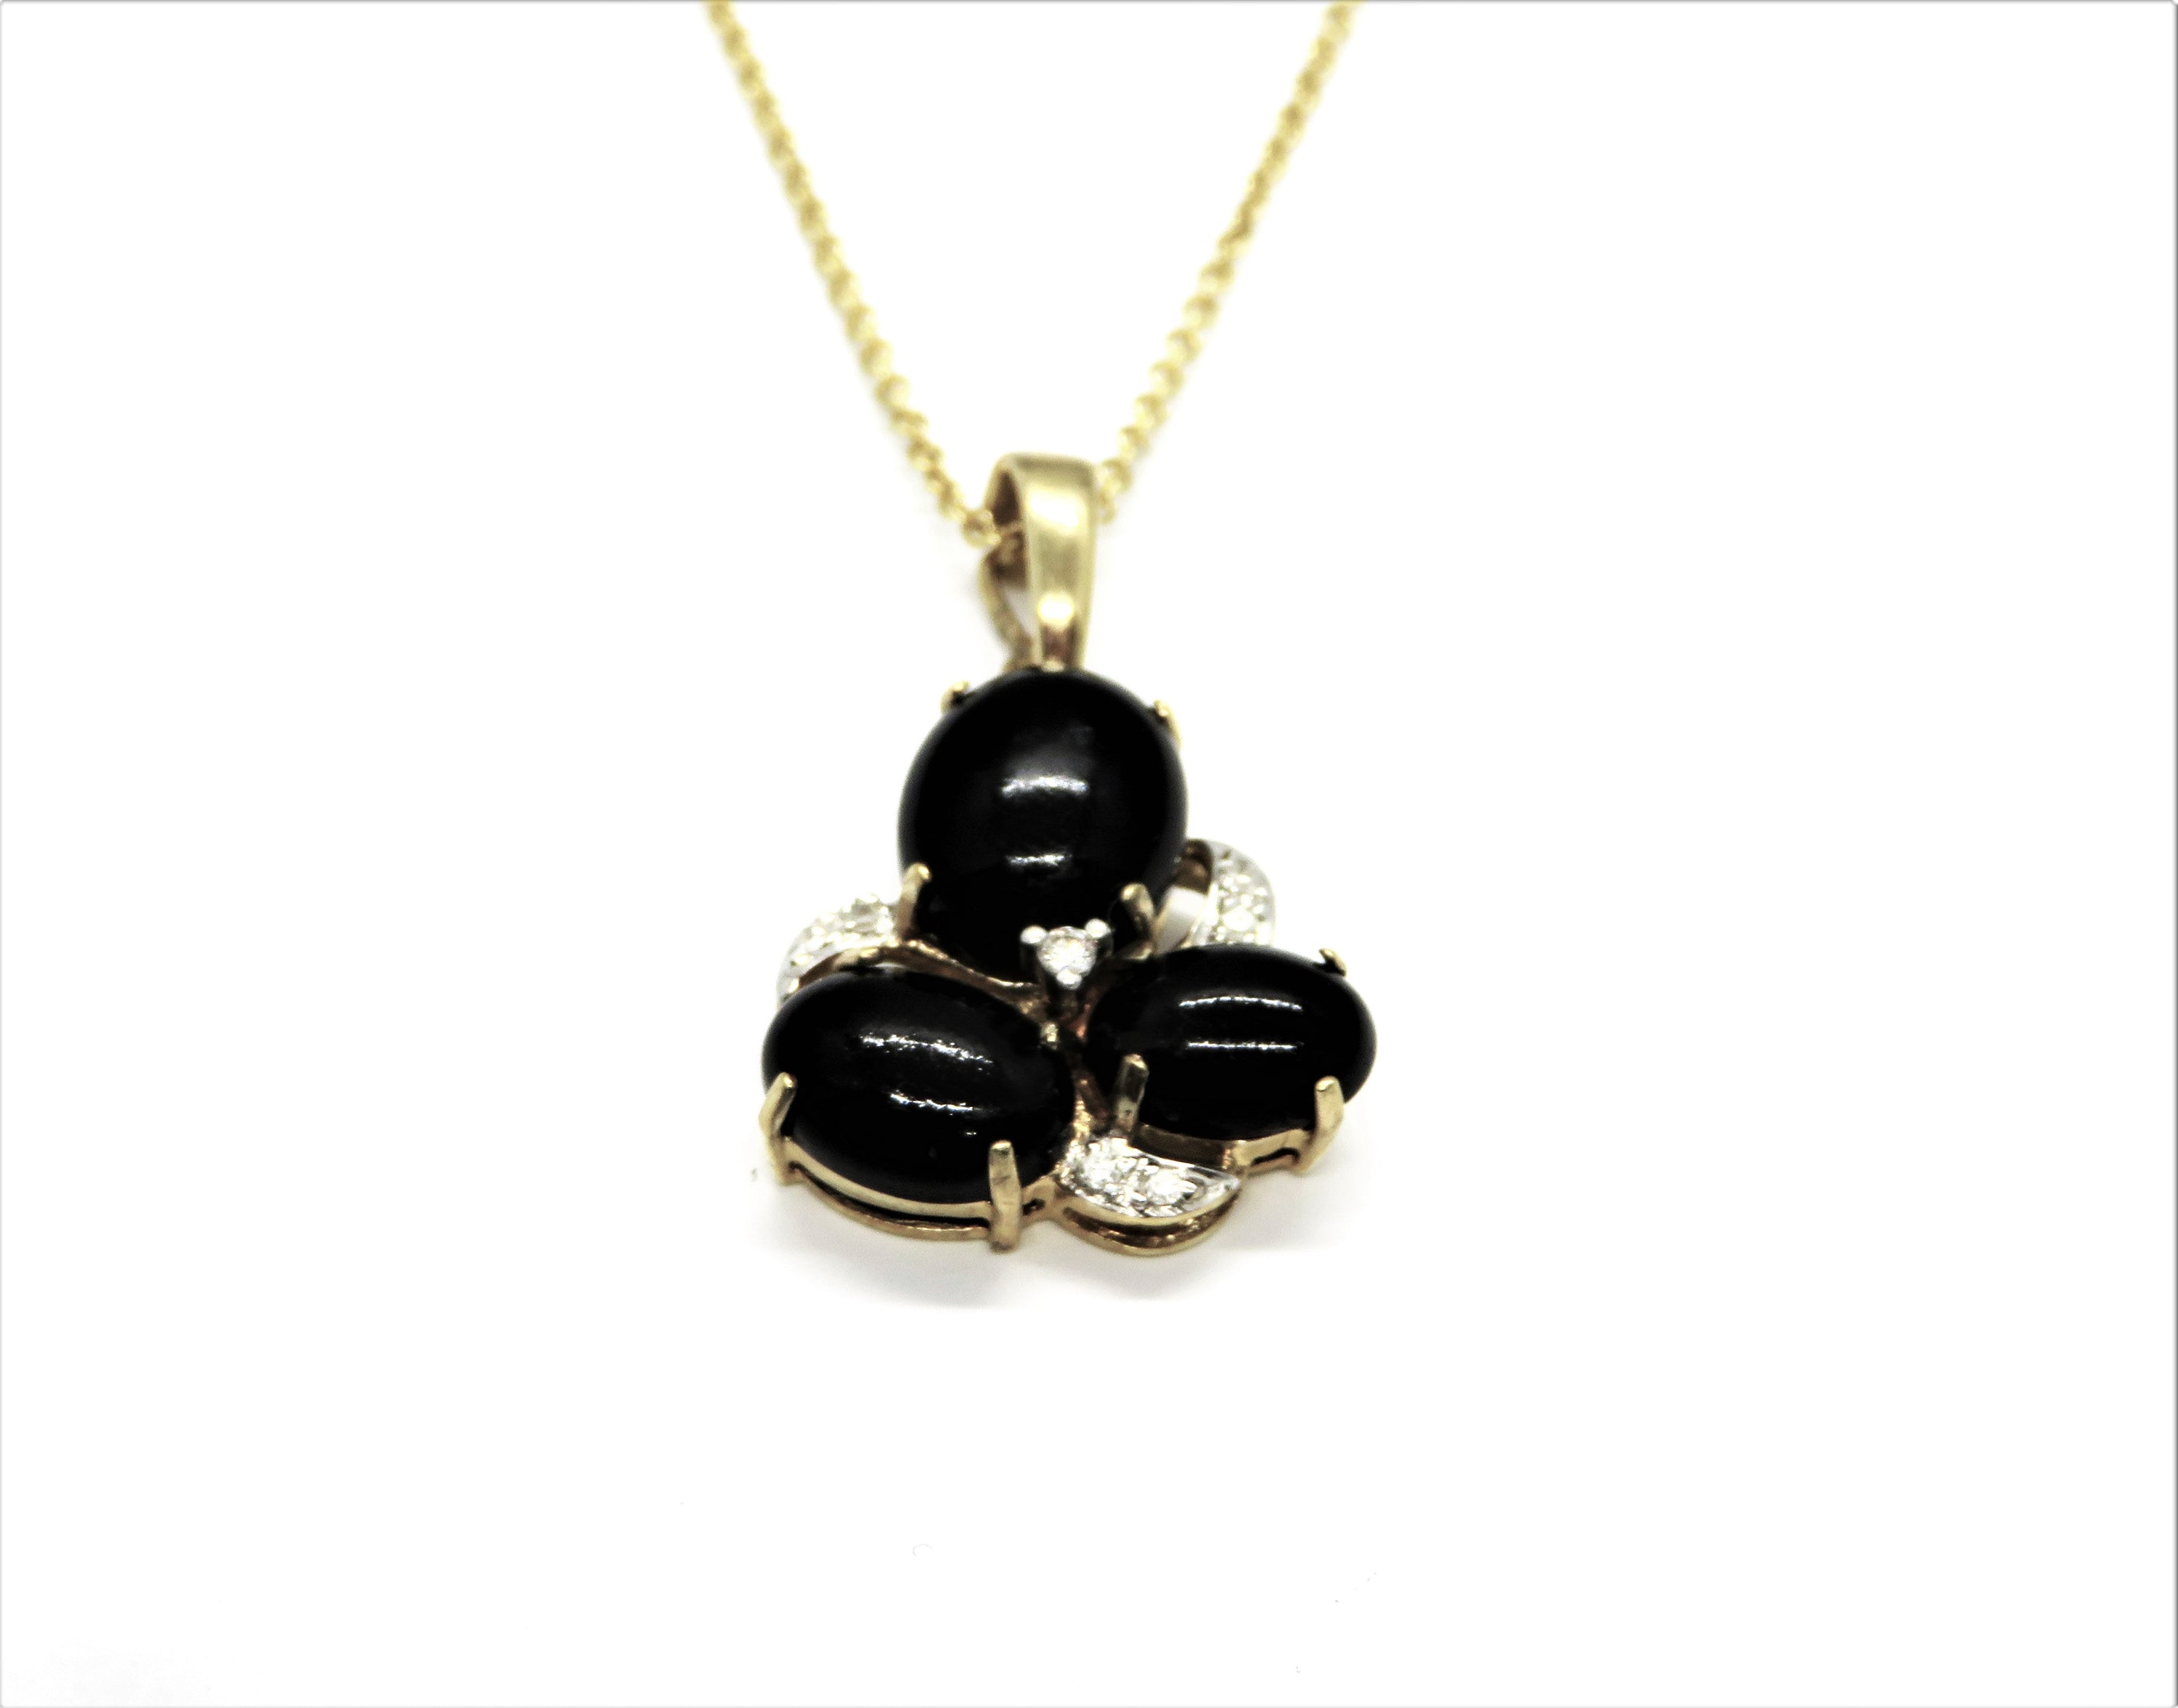 14kt Yellow Gold Onyx and Diamond Pendant Necklace